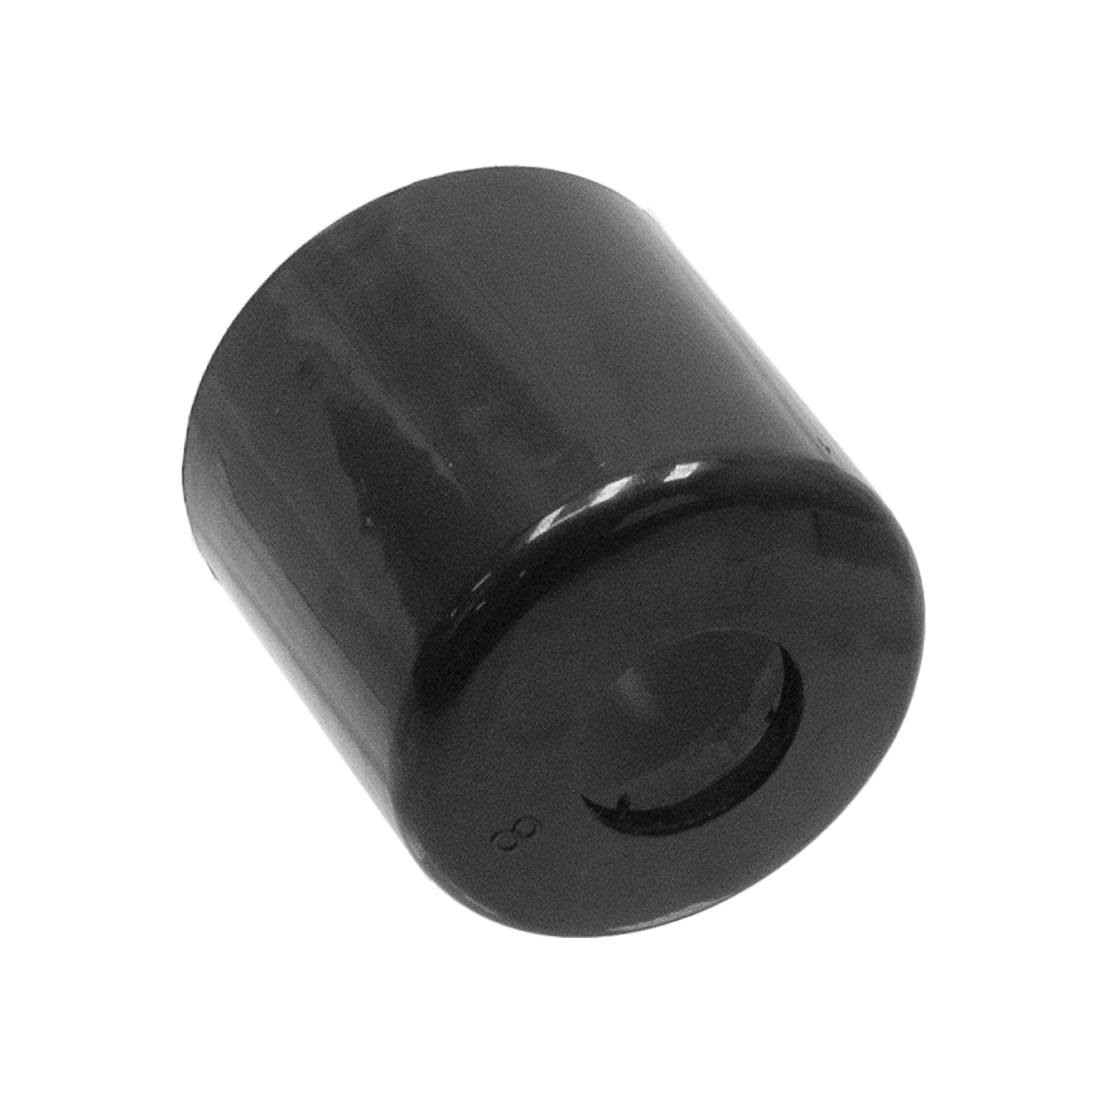 XERO Base Cap - For Pro and Micro Series Side View